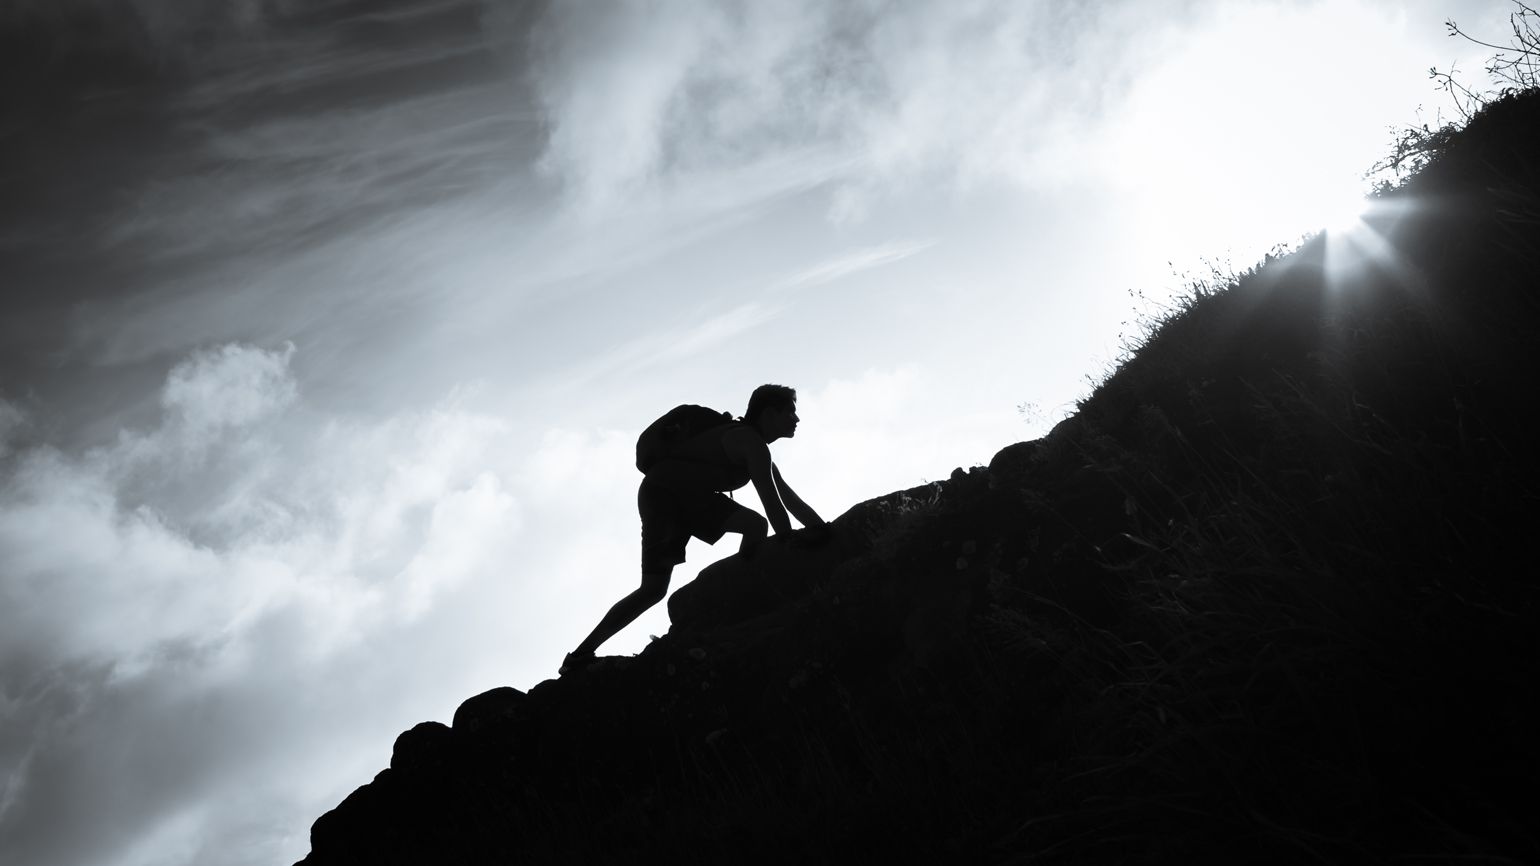 A silhouette of a person climbing up a large mountain.